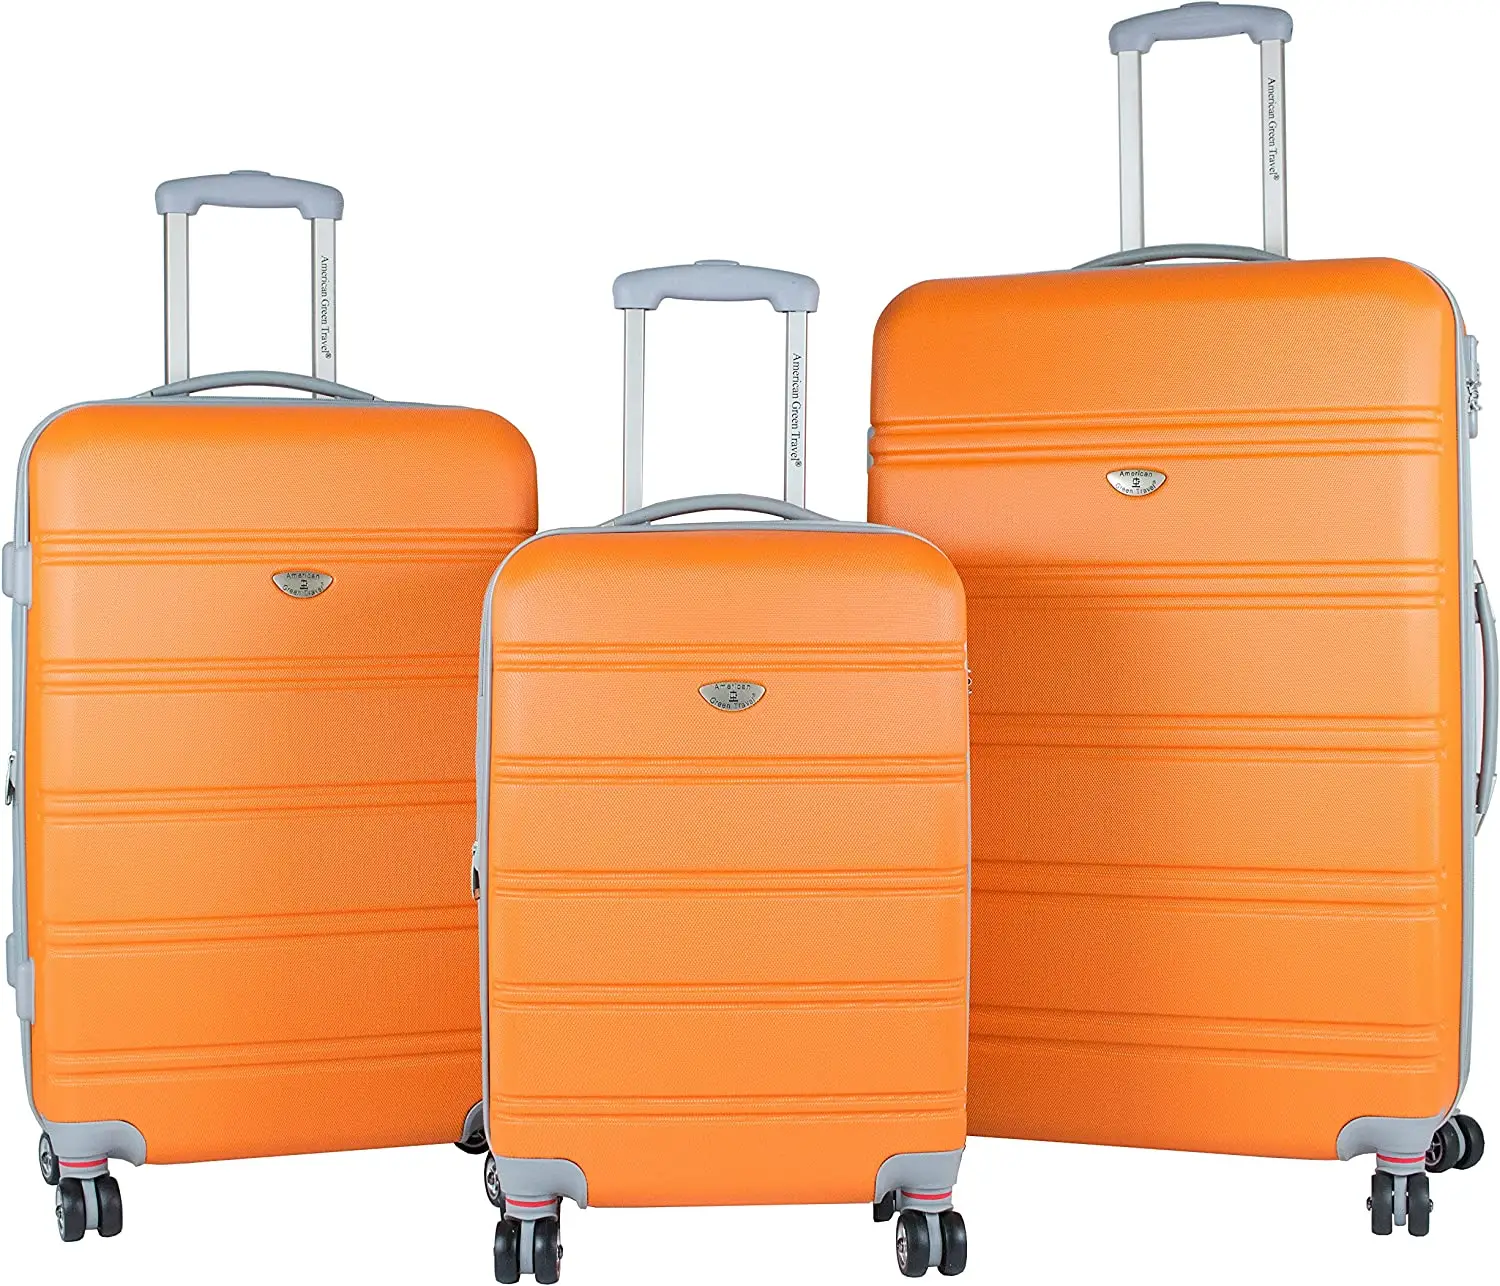 Read more about the article American Green Travel Luggage Reviewed – Is It Worth The Investment?